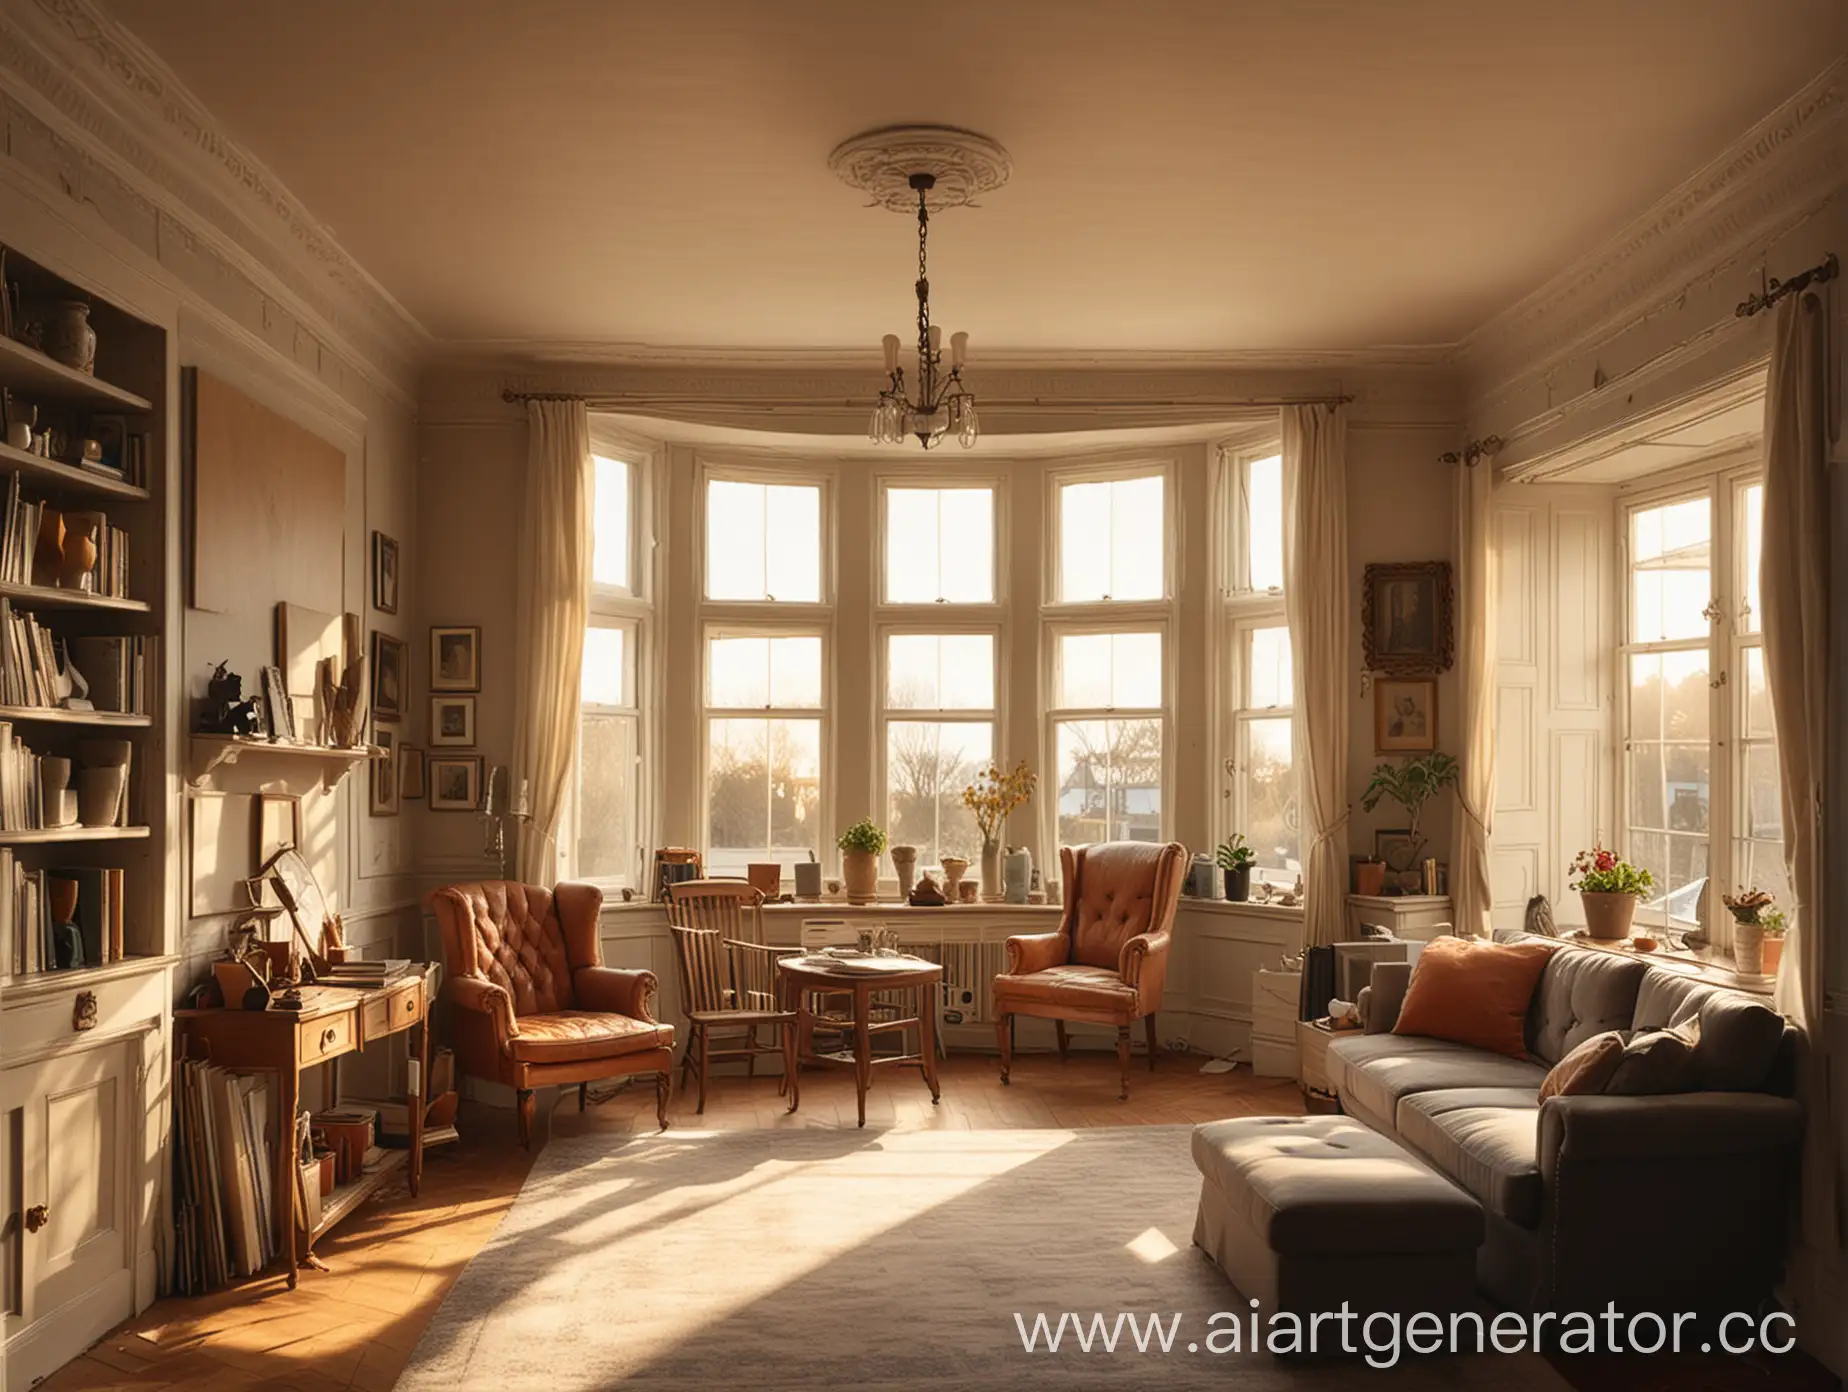 Sunlit-Room-with-Bay-Window-and-Furniture